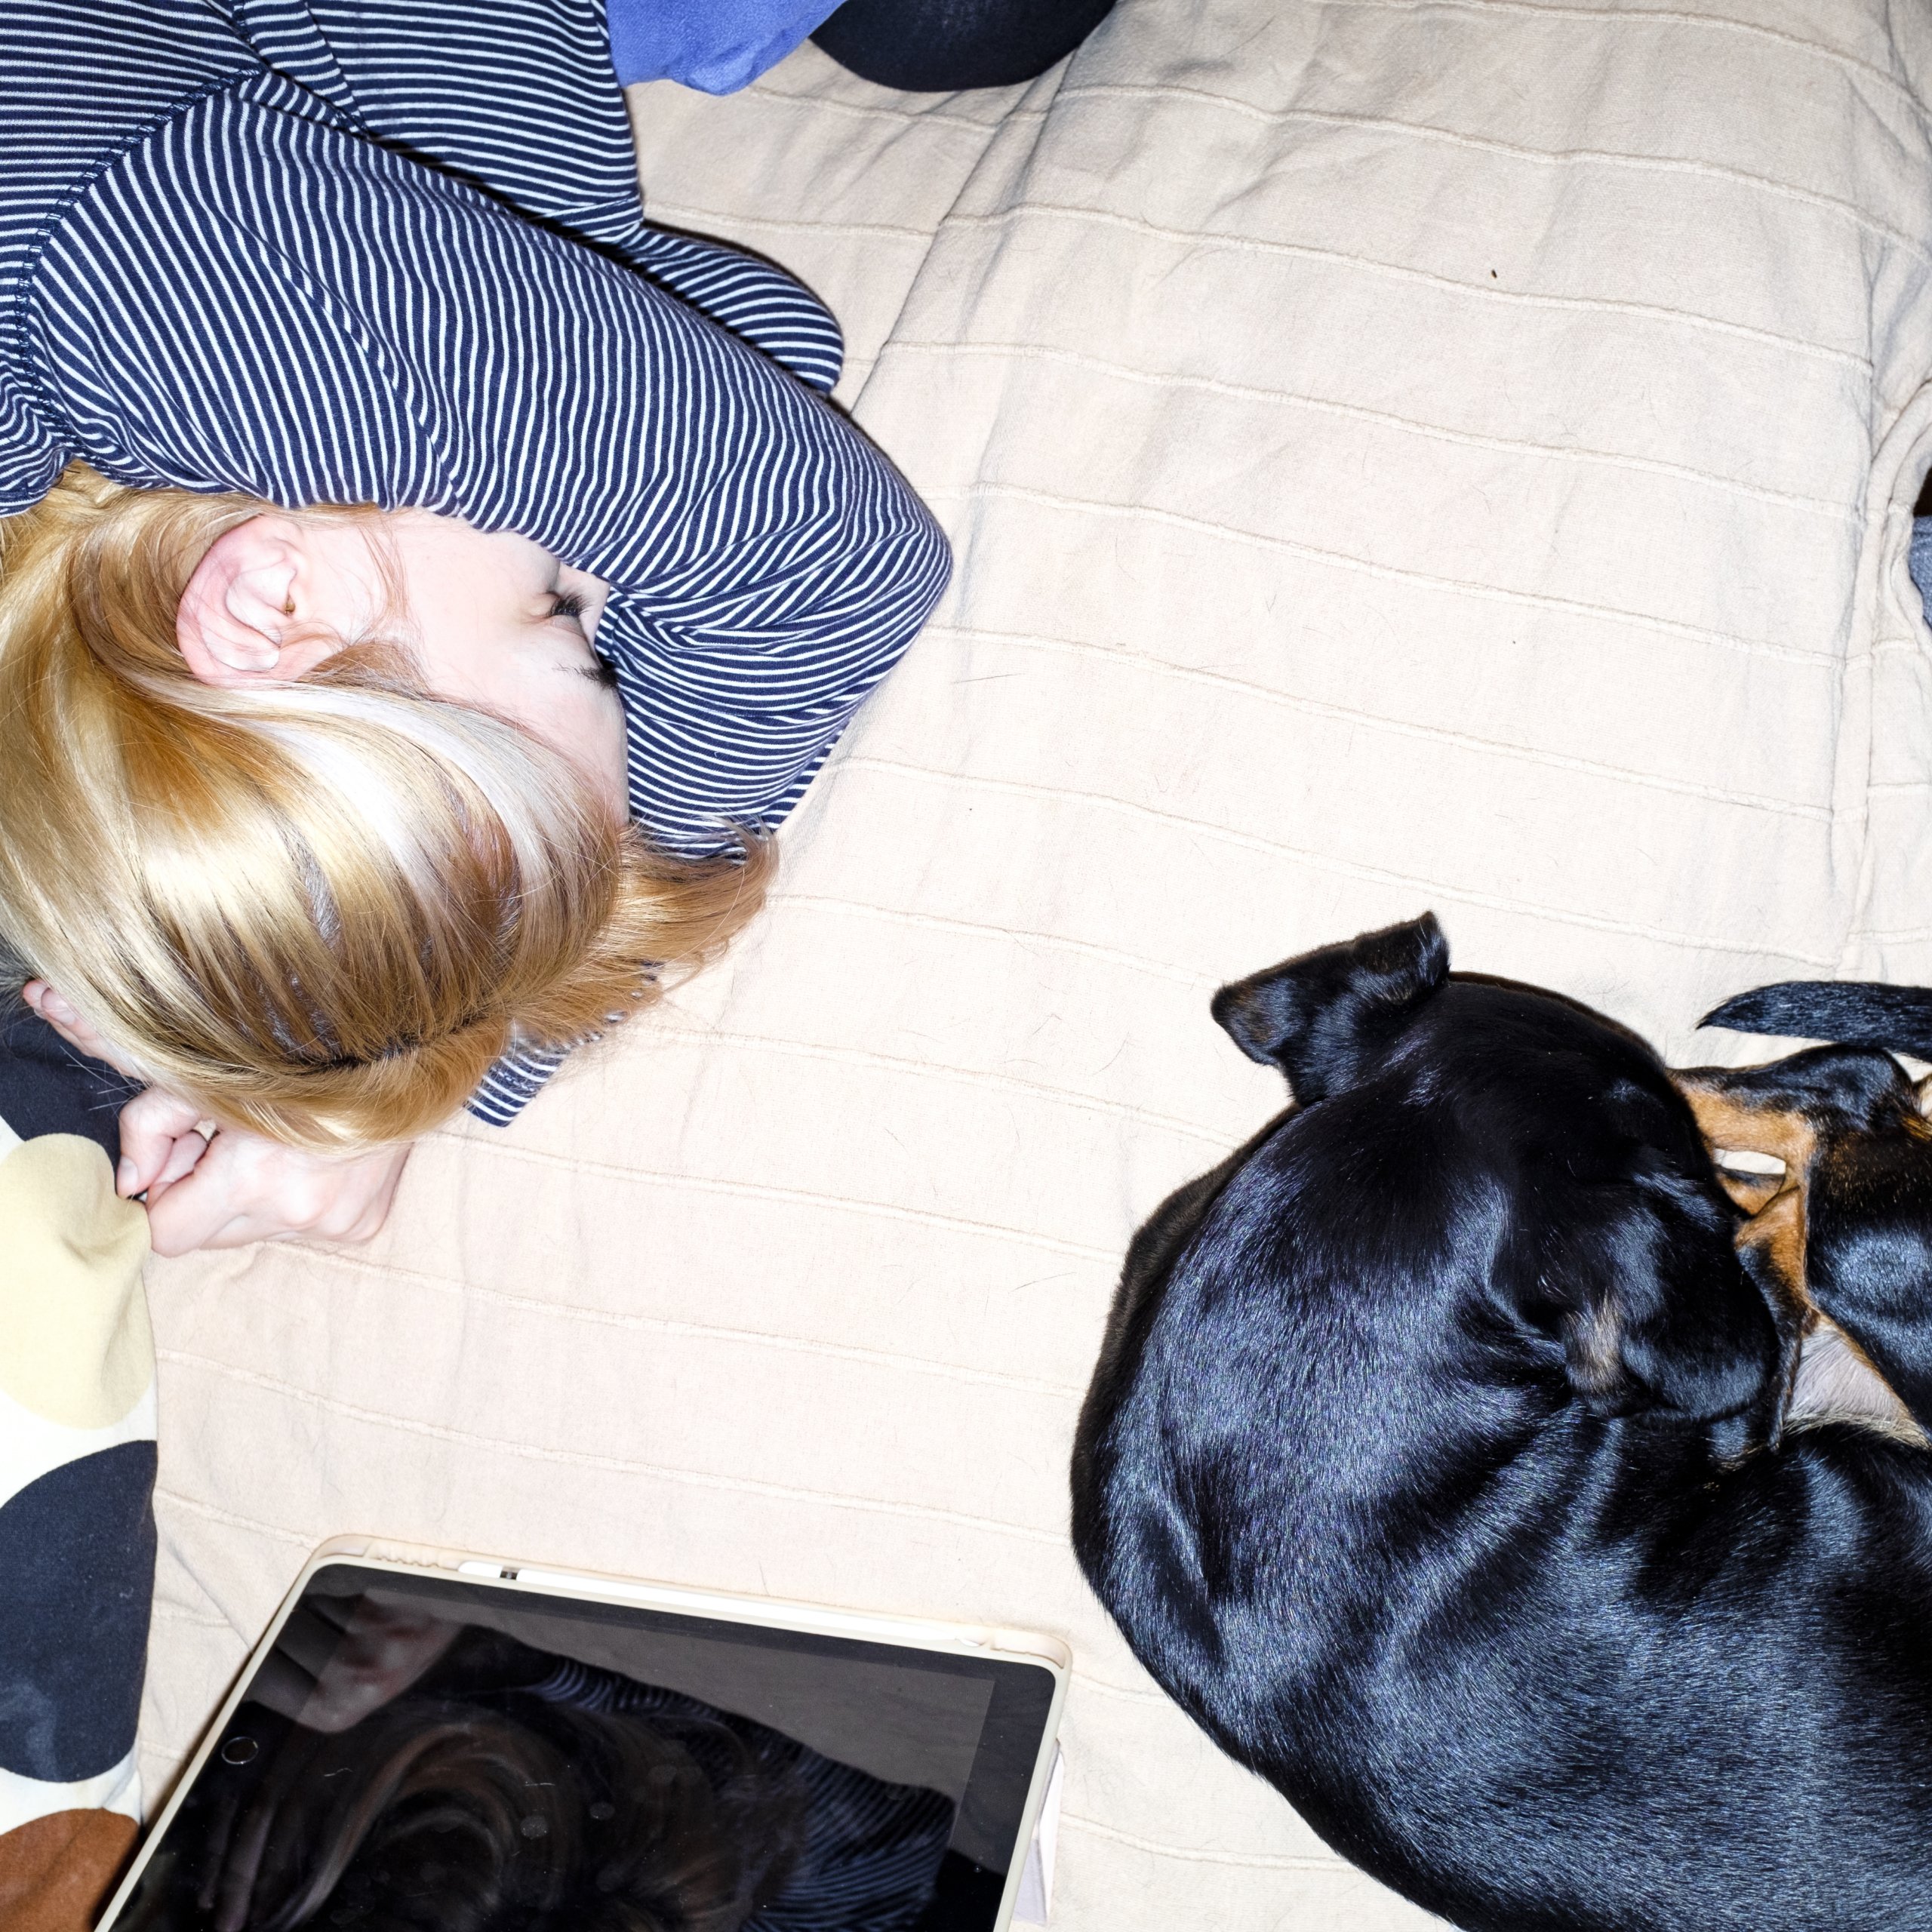 Toma's girlfriend and their dachshund laying on the bed.